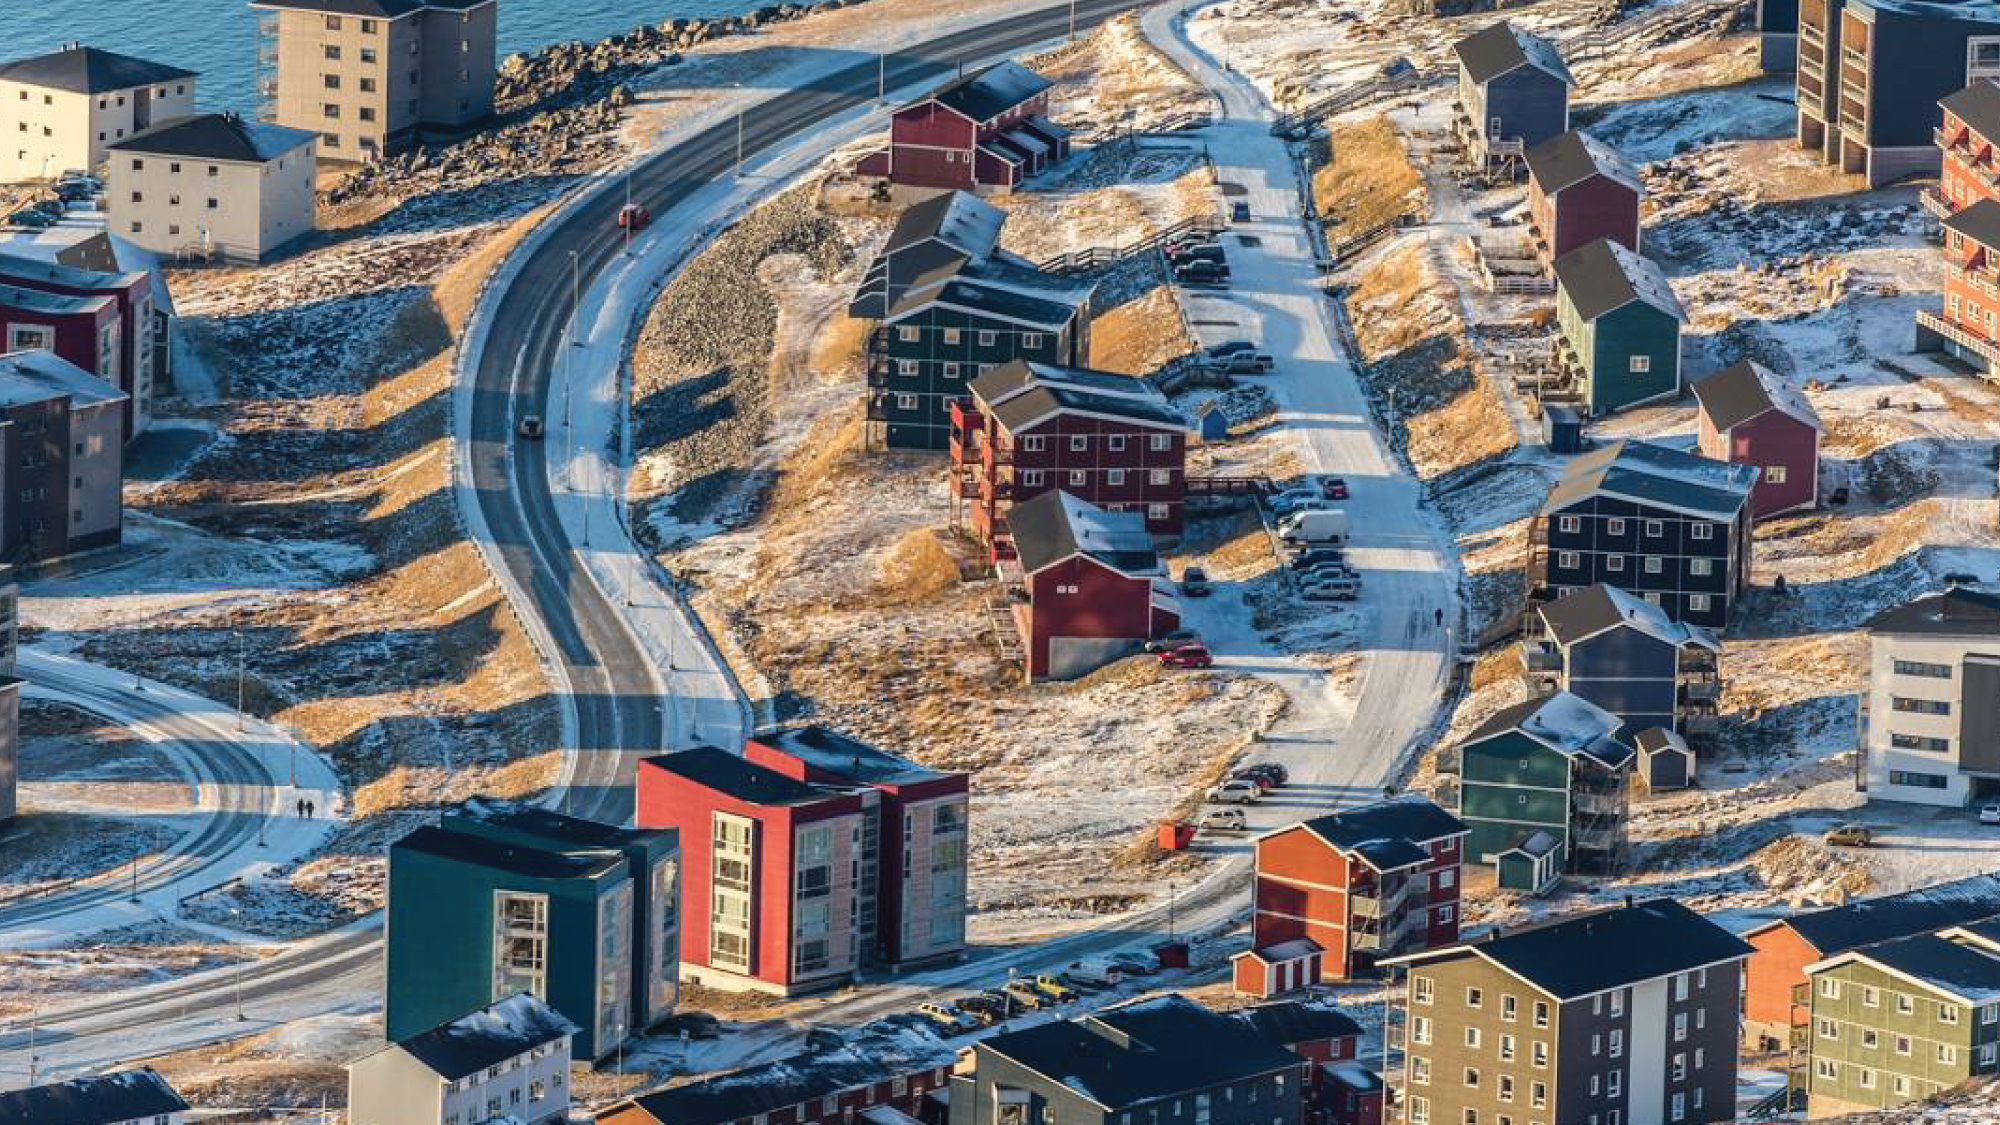 Aerial view of Nuuk, the capital of Greenland